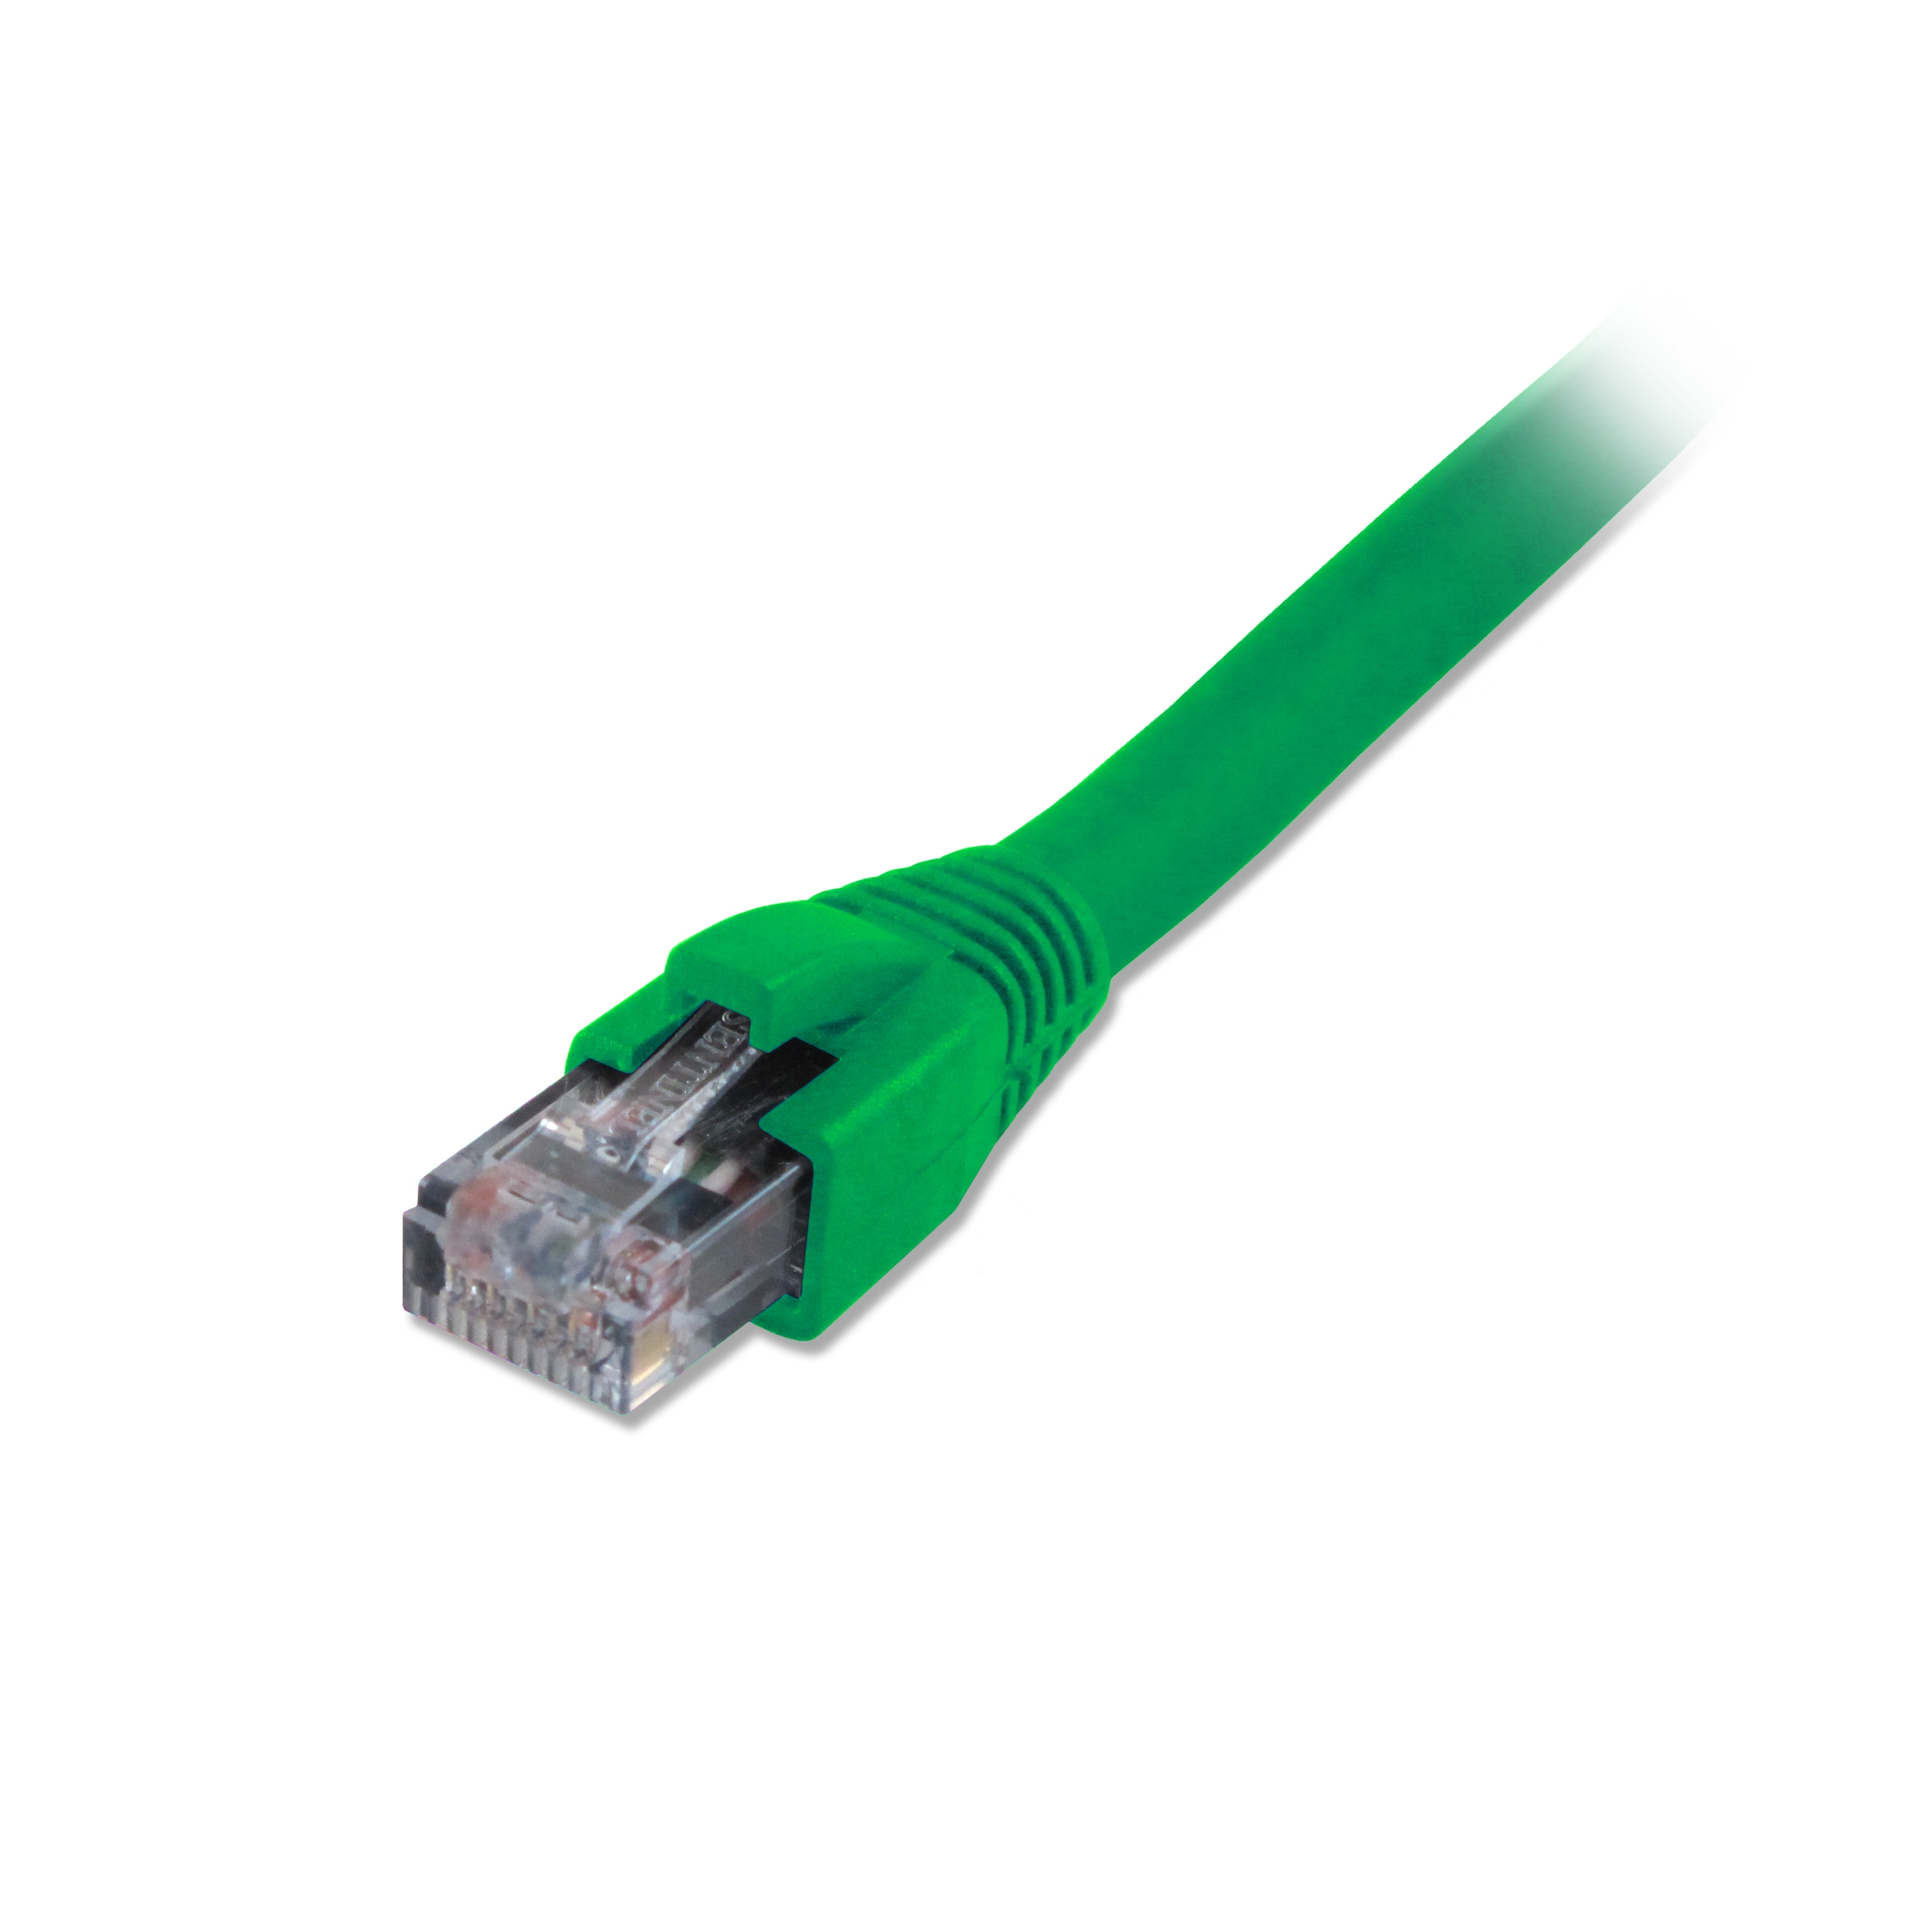 Comprehensive CAT5-350-1GRN Cat5e 350 Mhz Snagless Patch Cable 1ft Green